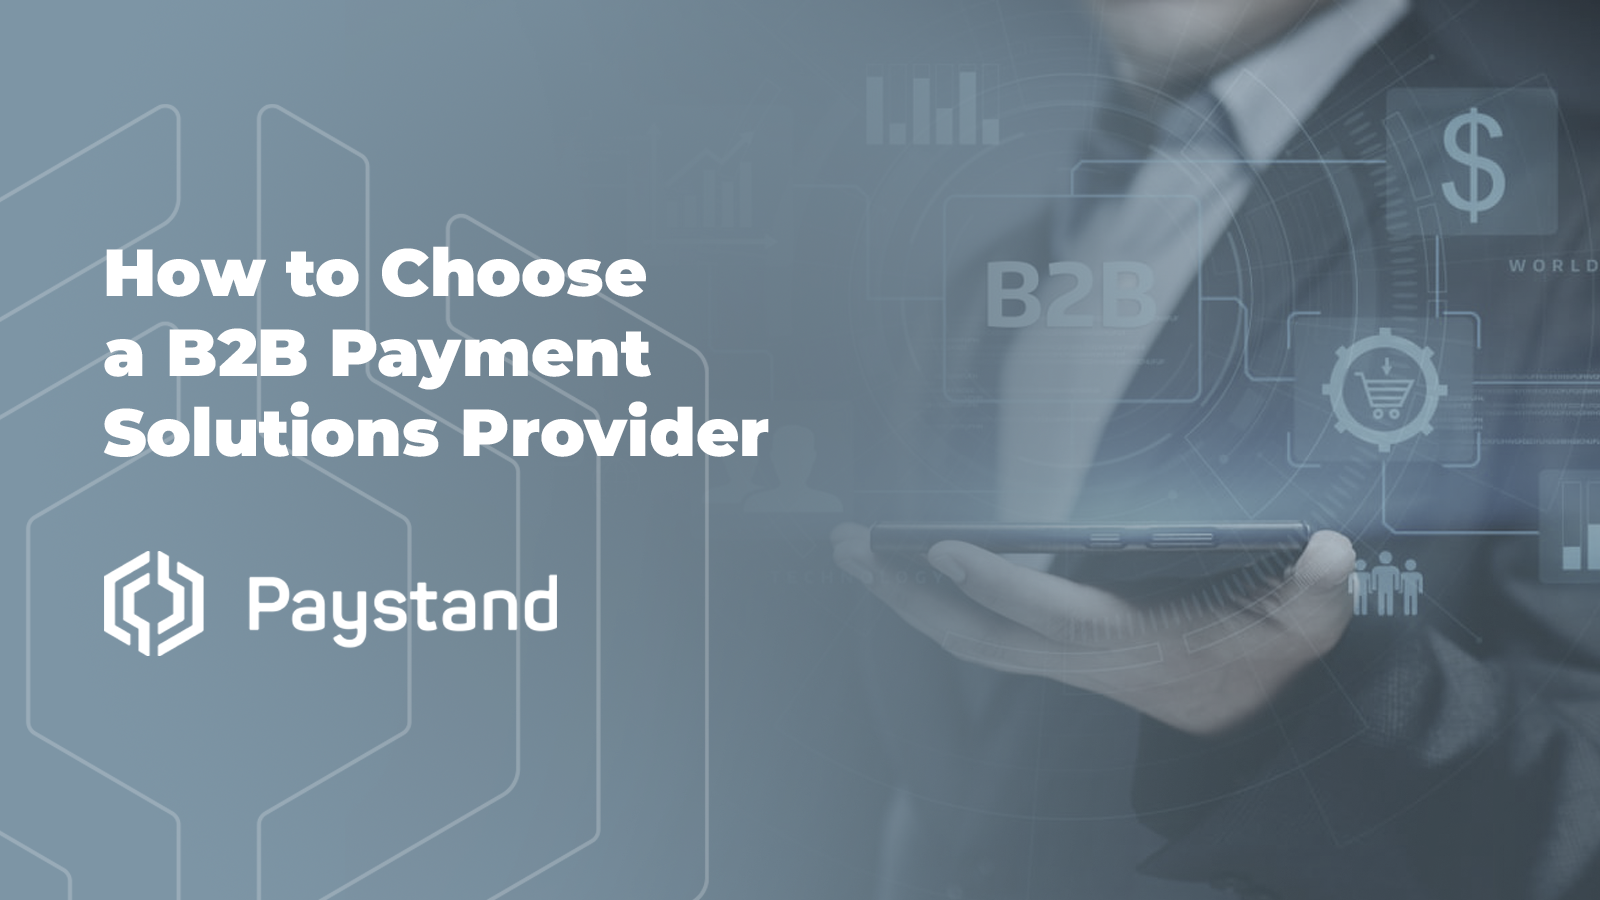 How to Choose a B2B Payment Solutions Provider